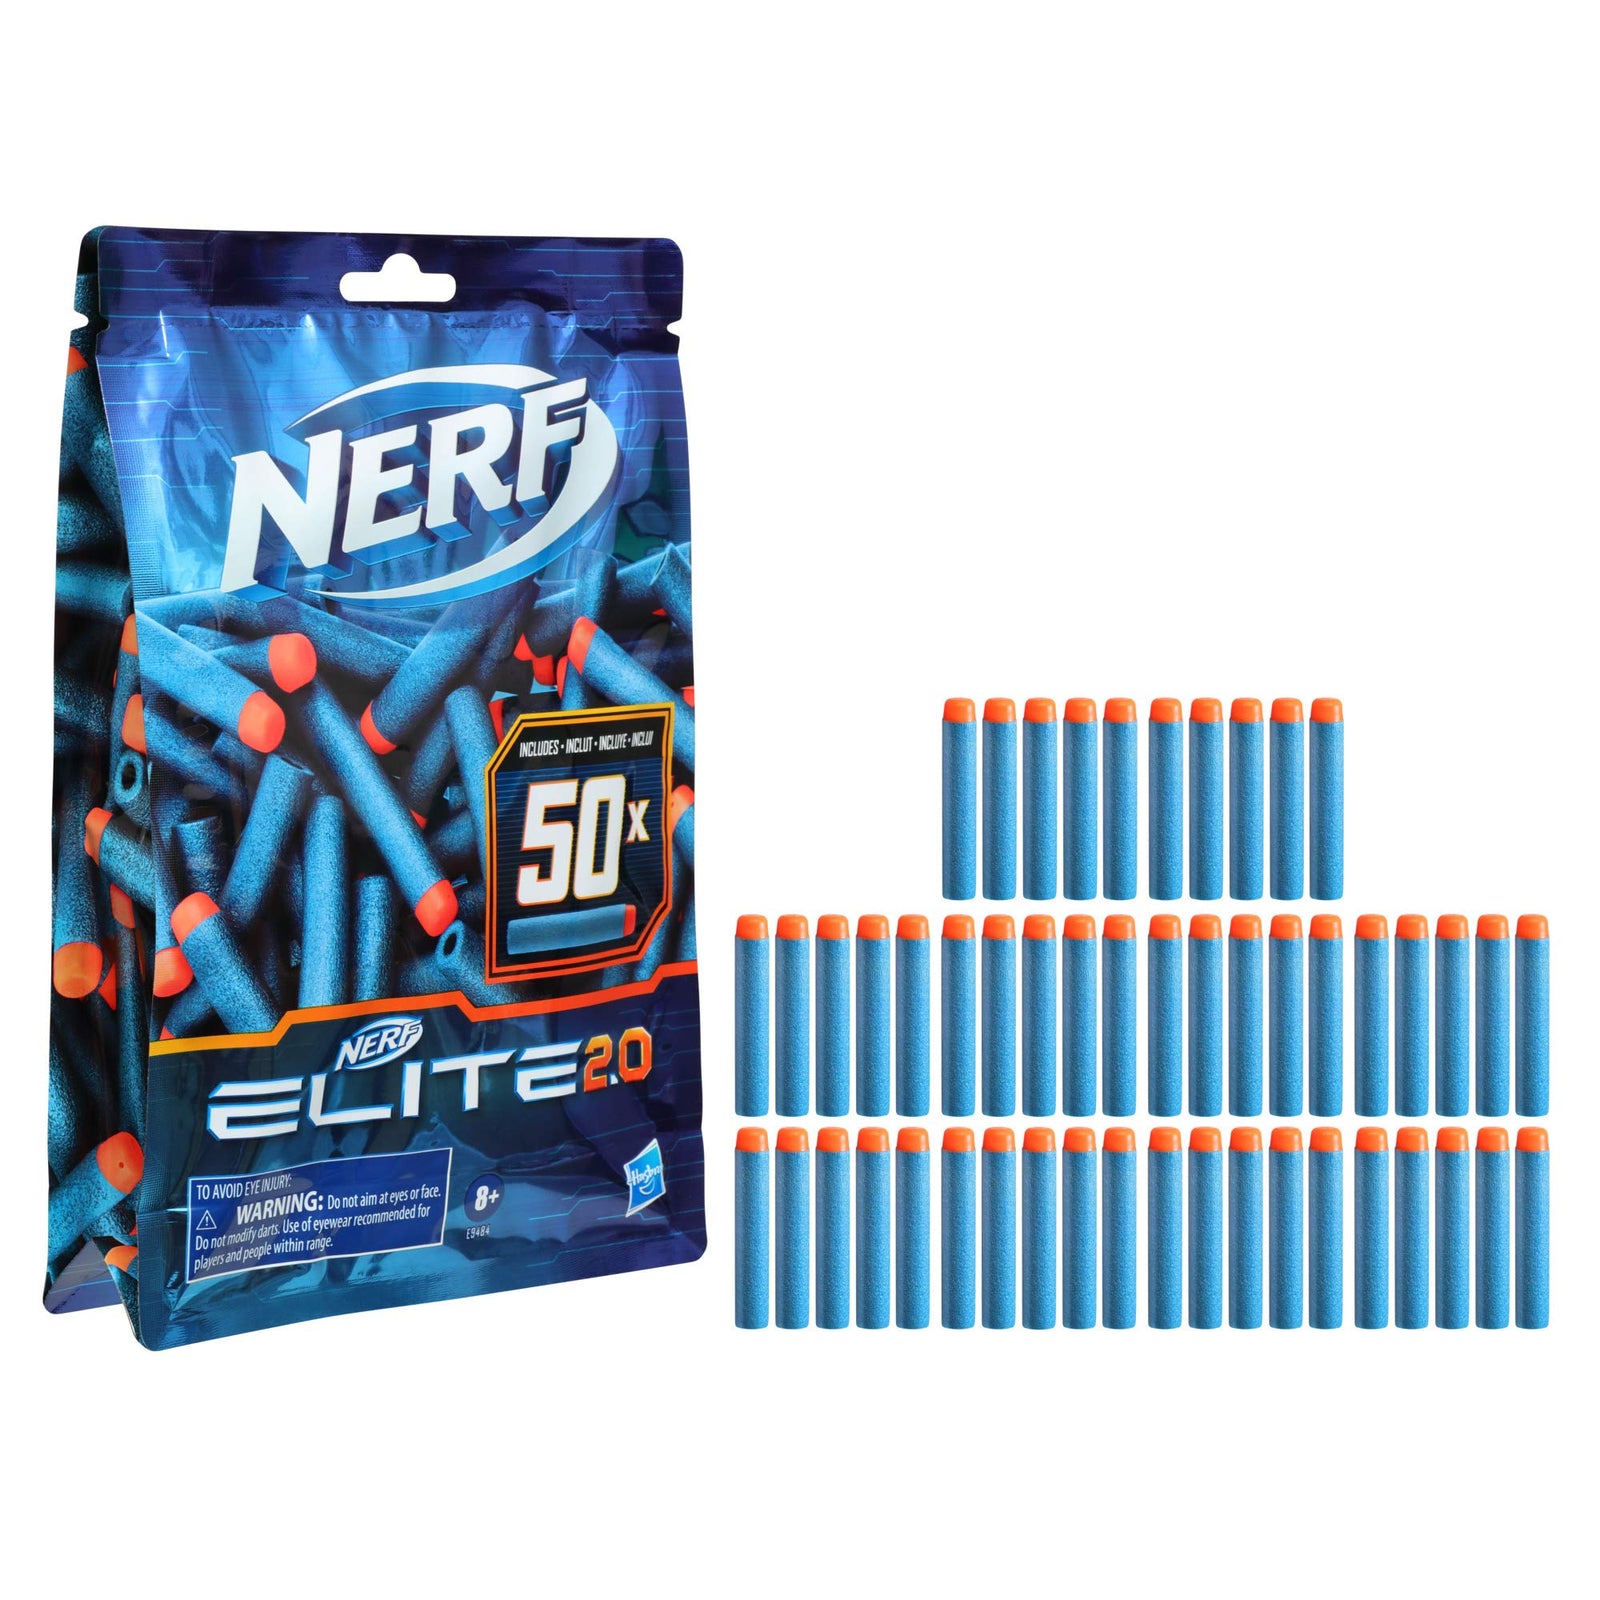 NERF Elite 2.0 50-Dart Refill Pack -- 50 Official Elite 2.0 Foam Darts -- Compatible with All Blasters That Use Elite Darts